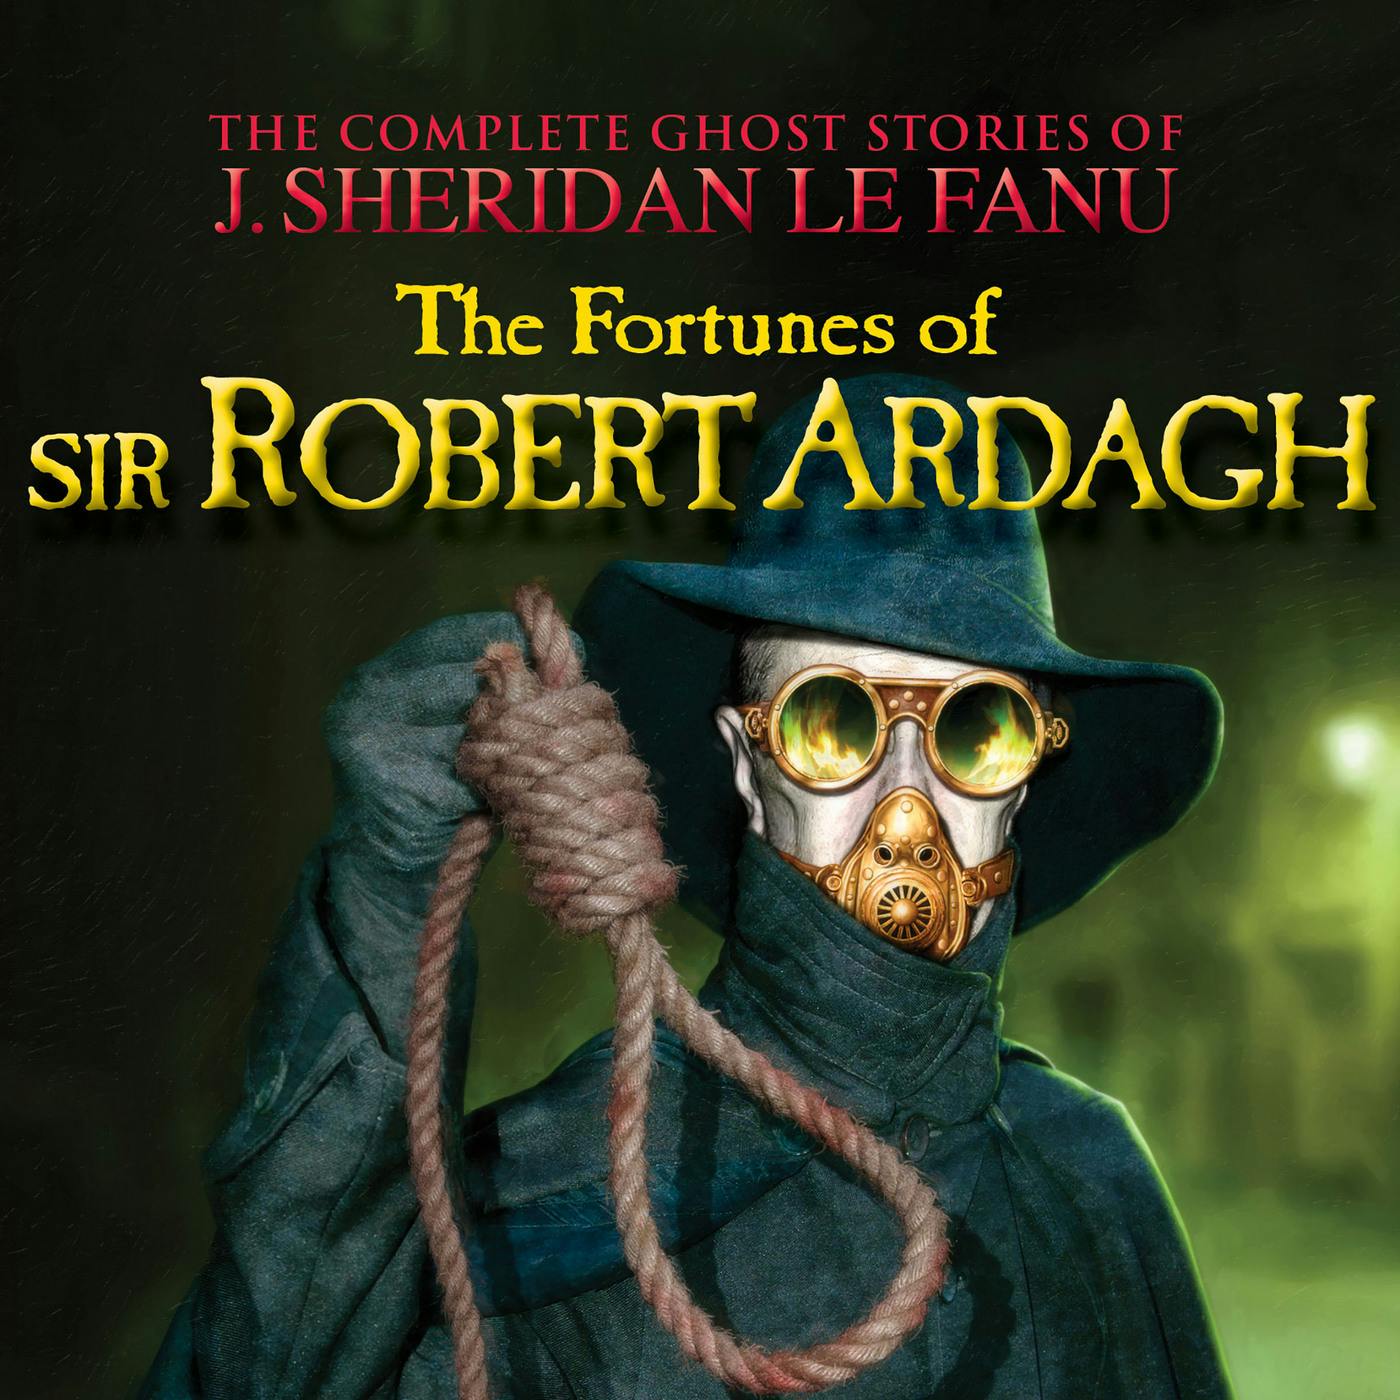 The Fortunes of Sir Robert Ardagh - The Complete Ghost Stories of J. Sheridan Le Fanu, Vol. 4 of 30 (Unabridged) - J. Sheridan Le Fanu